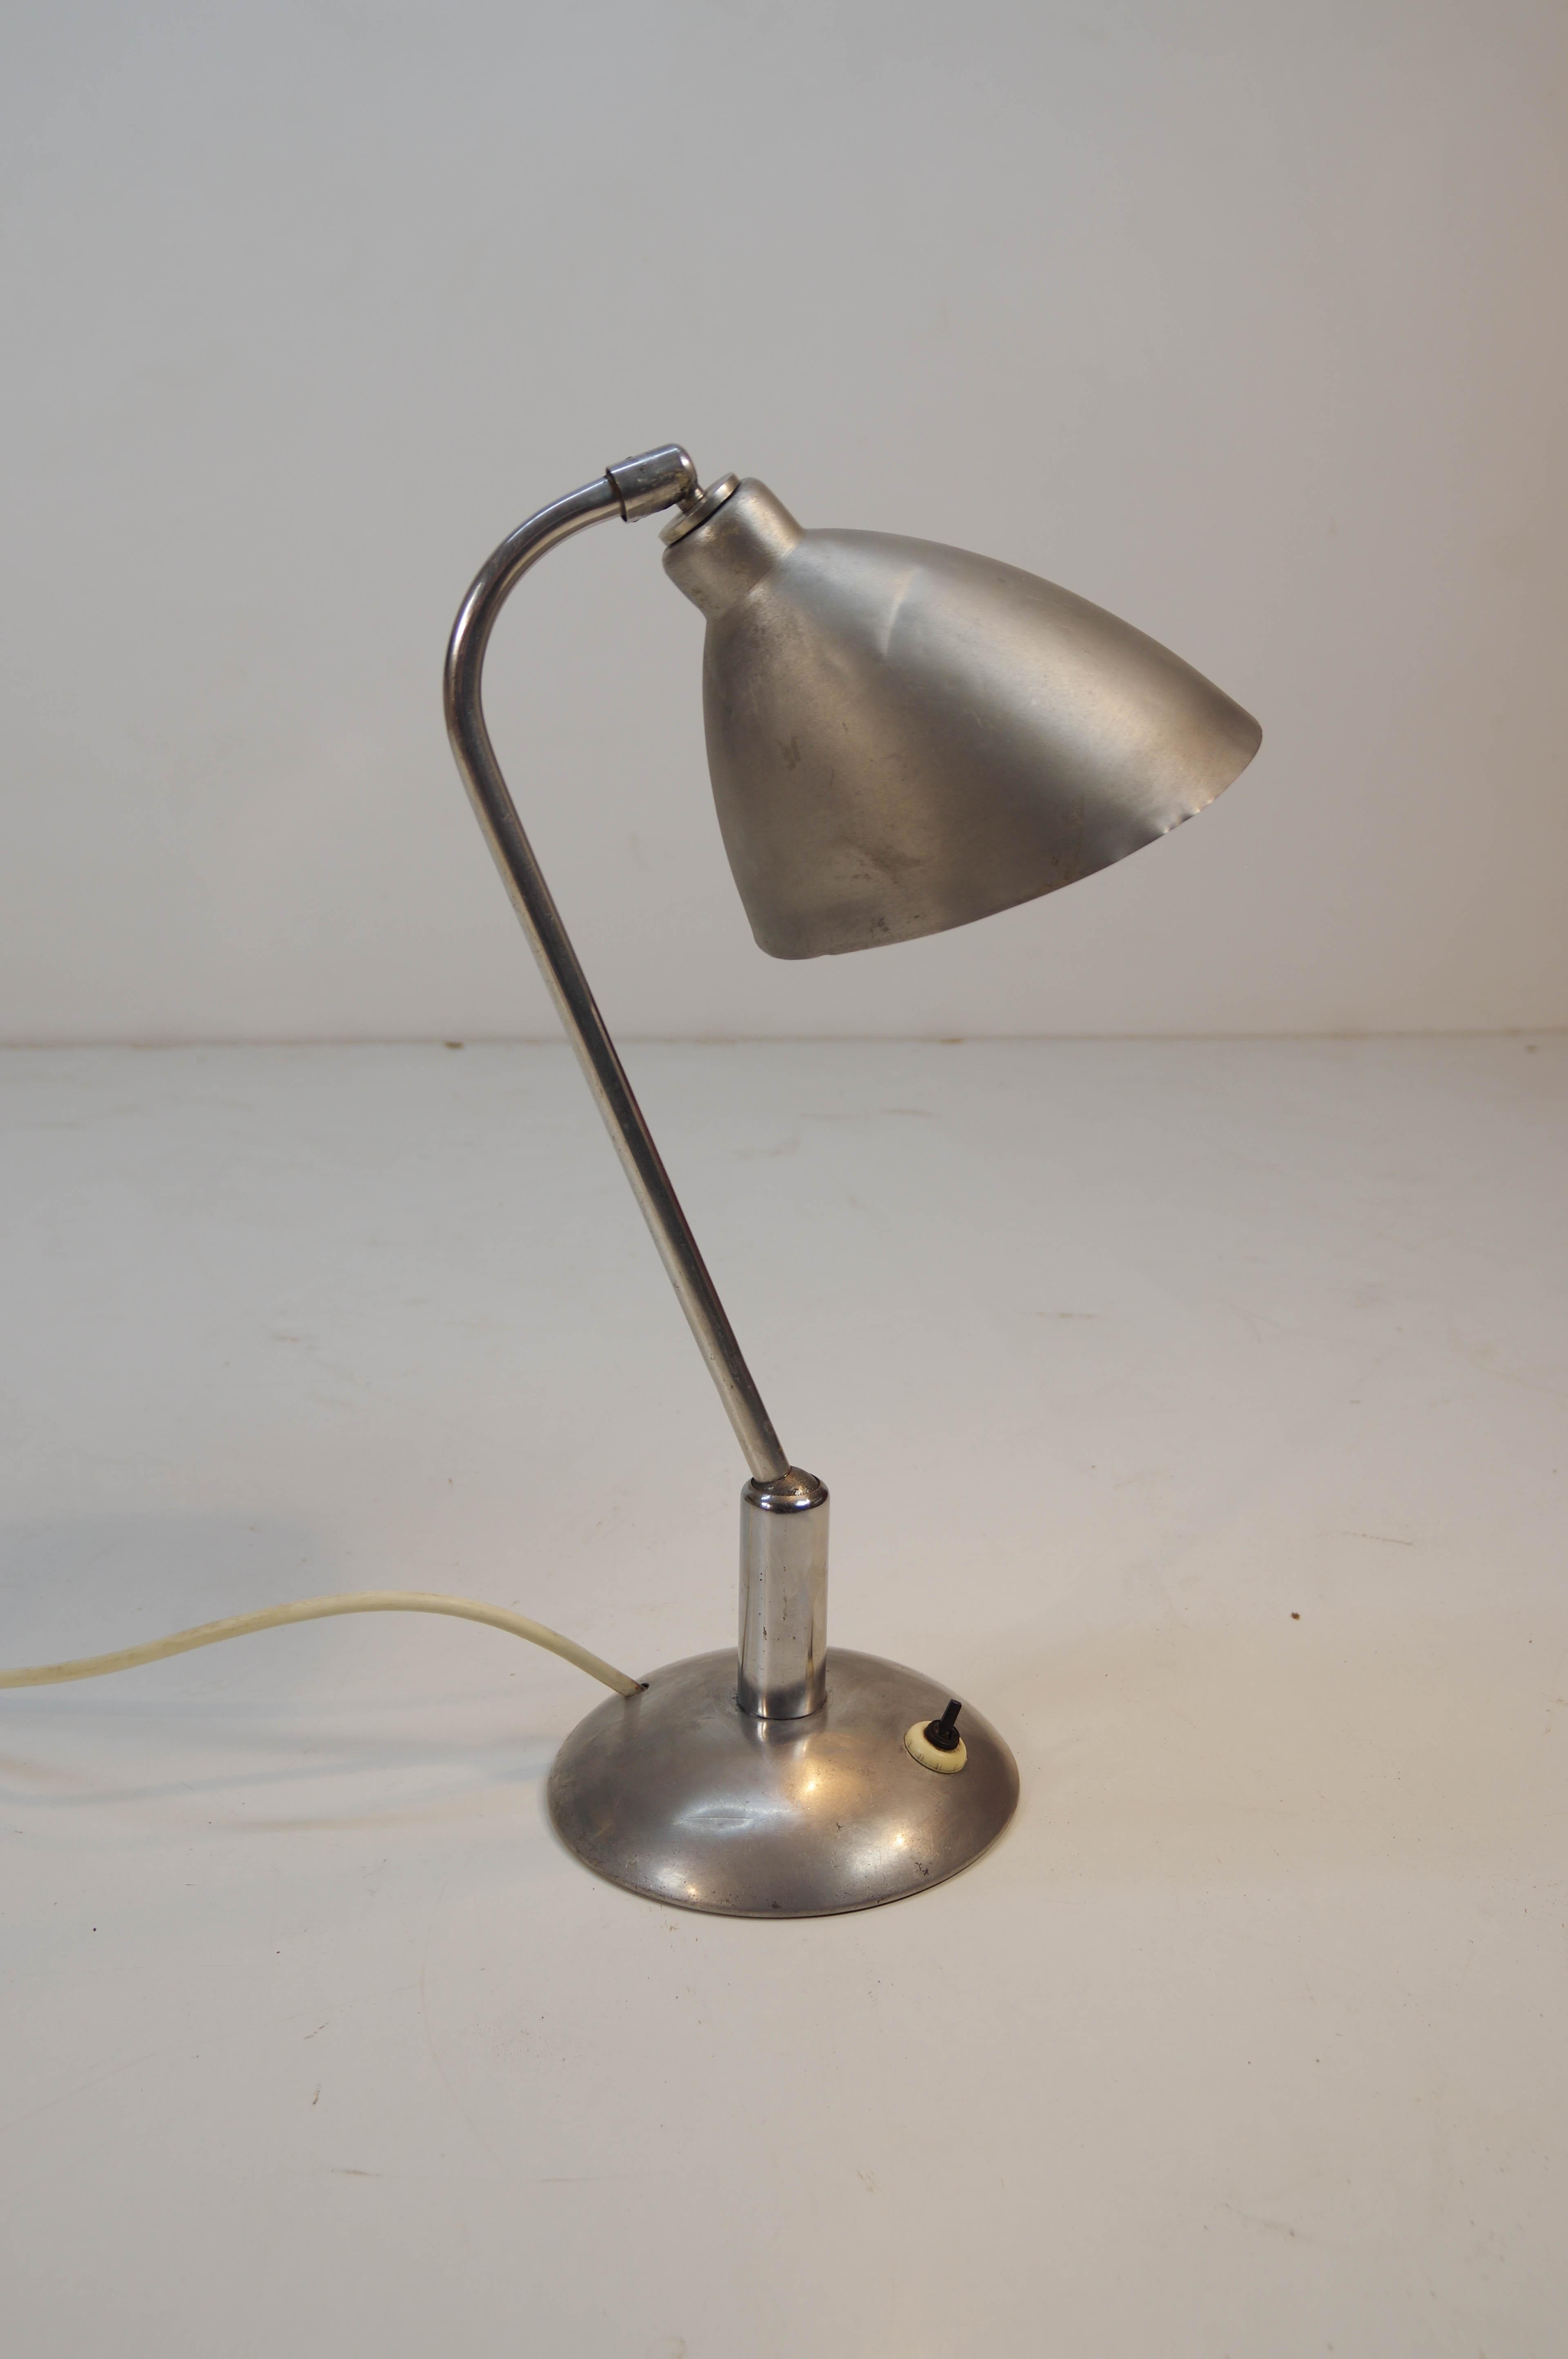 Iconic aluminum adjustable table lamp by Franta Anyz. Unique type of joint invented by Anyz. Original condition - some defects on a shade. 1x40W, E25 or E26 or E27 bulb.